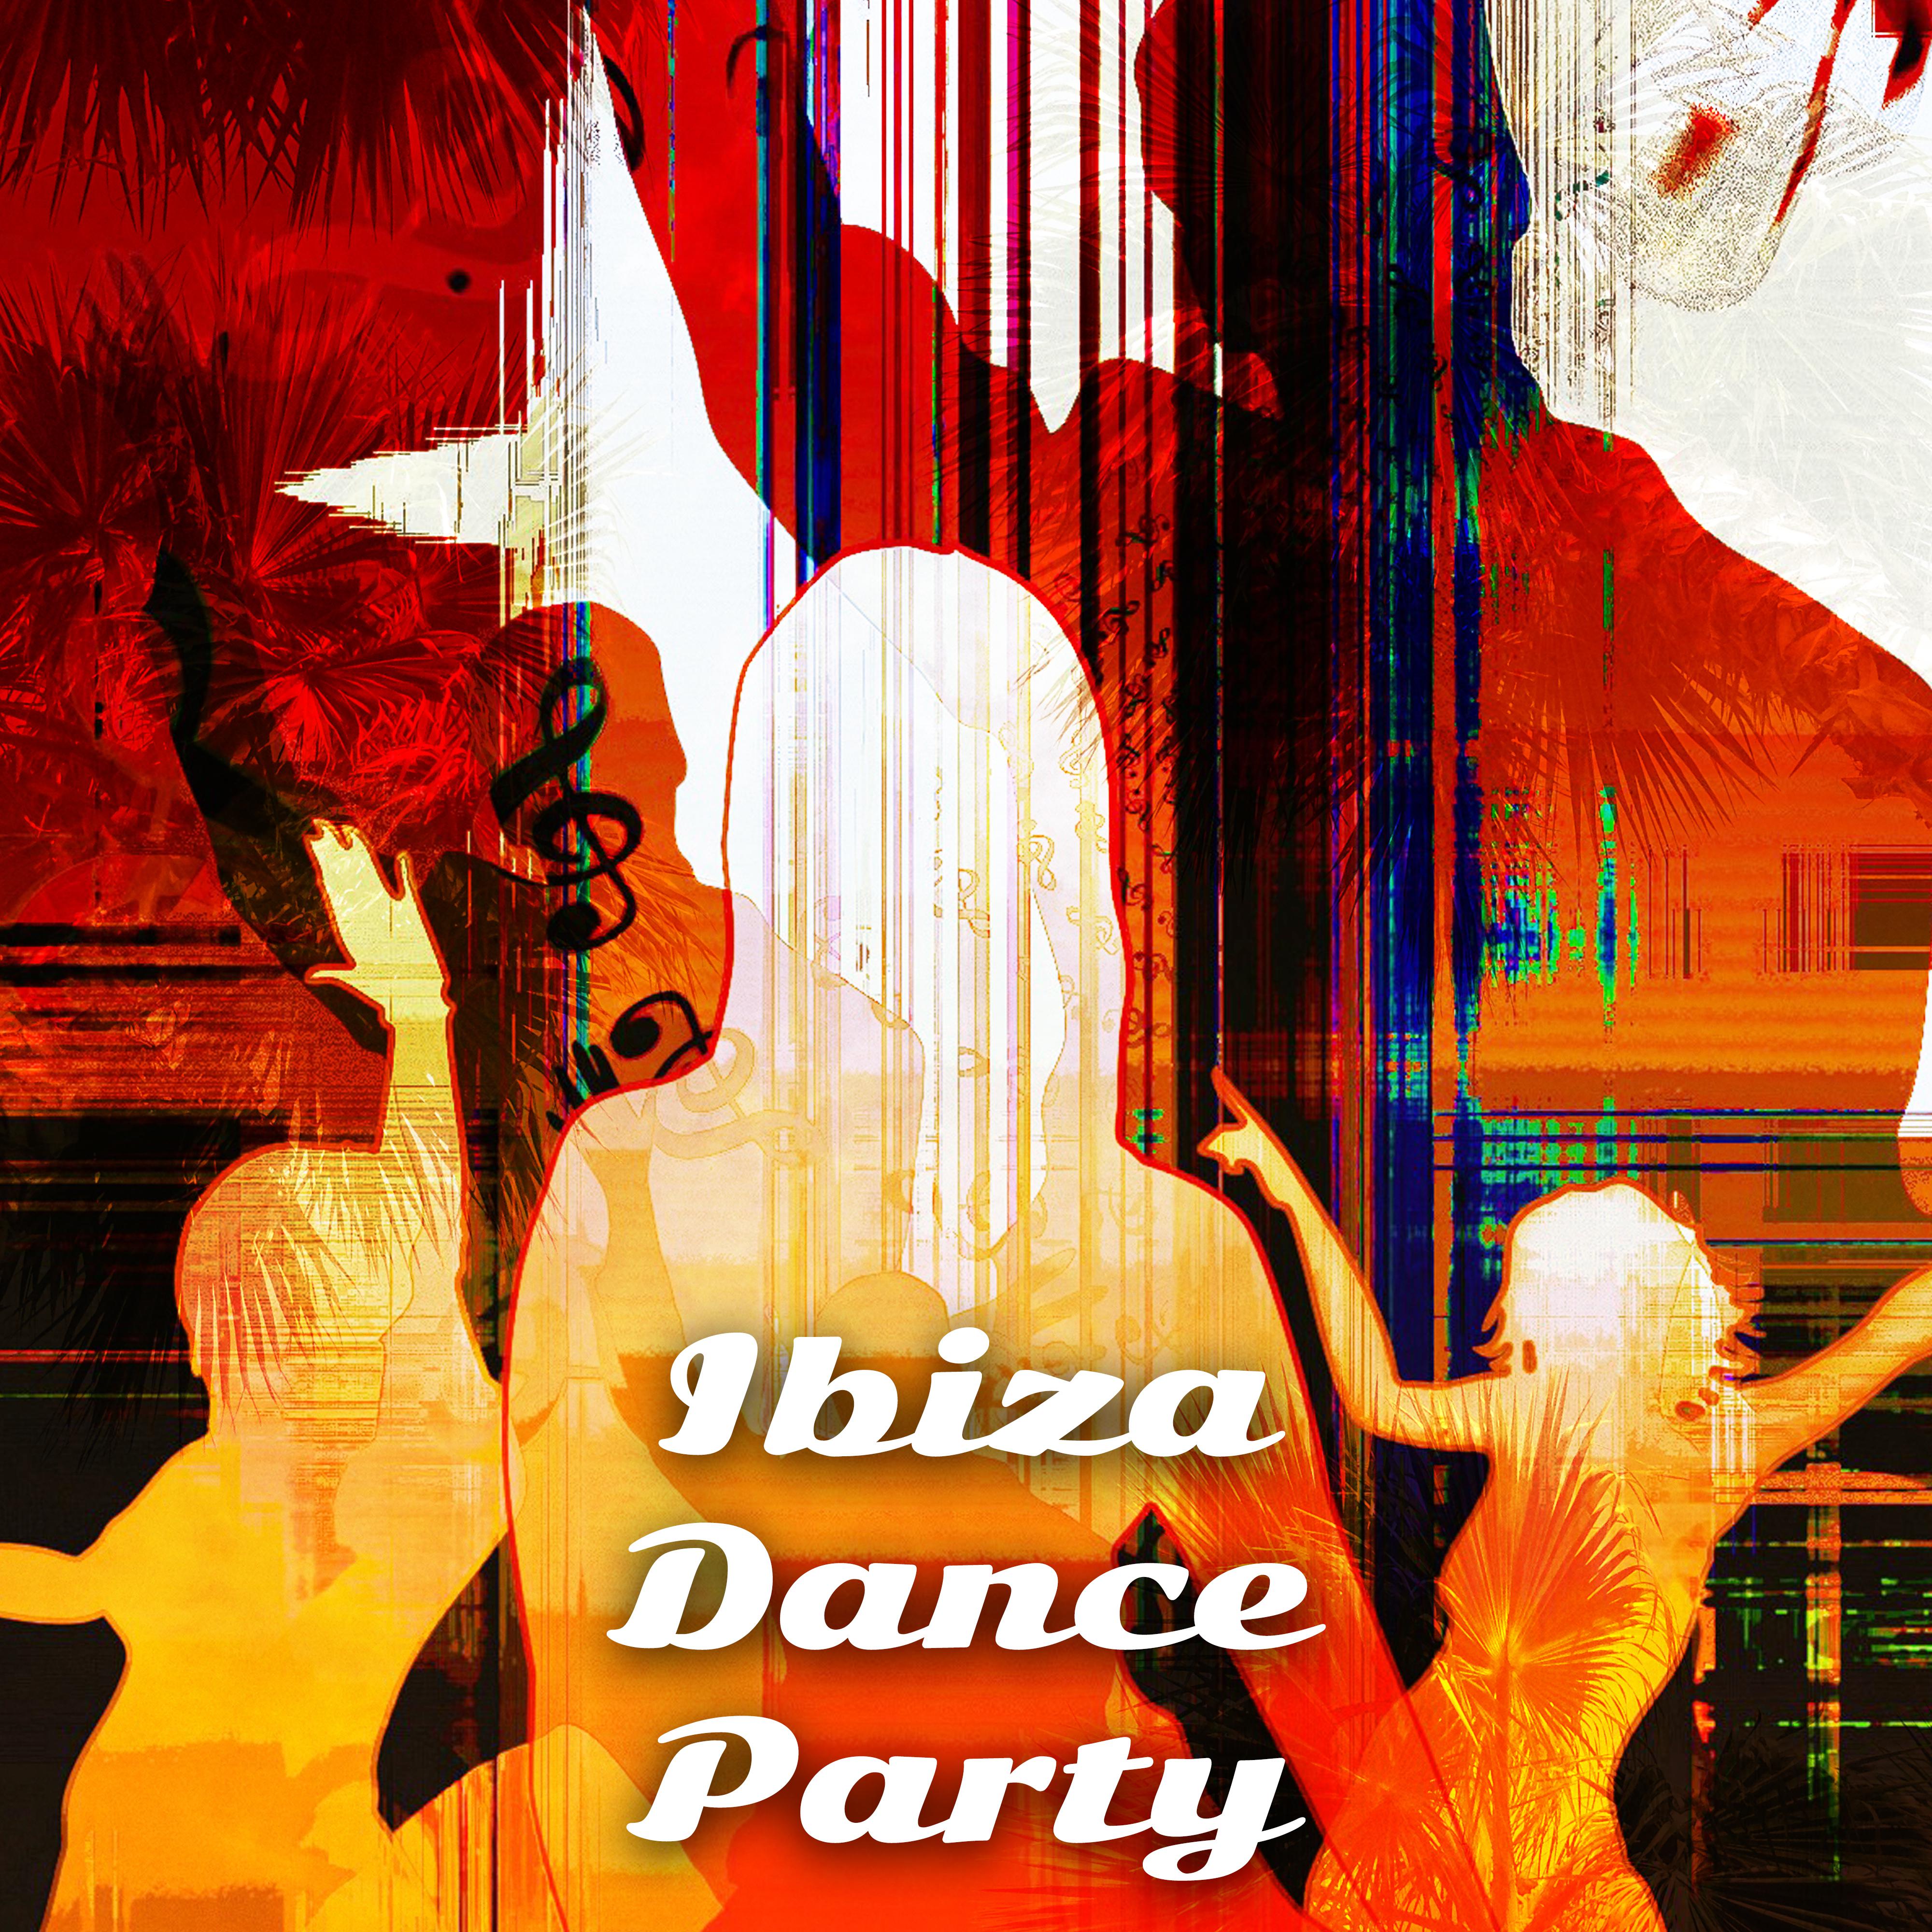 Ibiza Dance Party – Summer Chill, Dancefloor, Time to Party, Beach Chill, **** Vibes, Electronic Music, Holiday Chill Out 2017